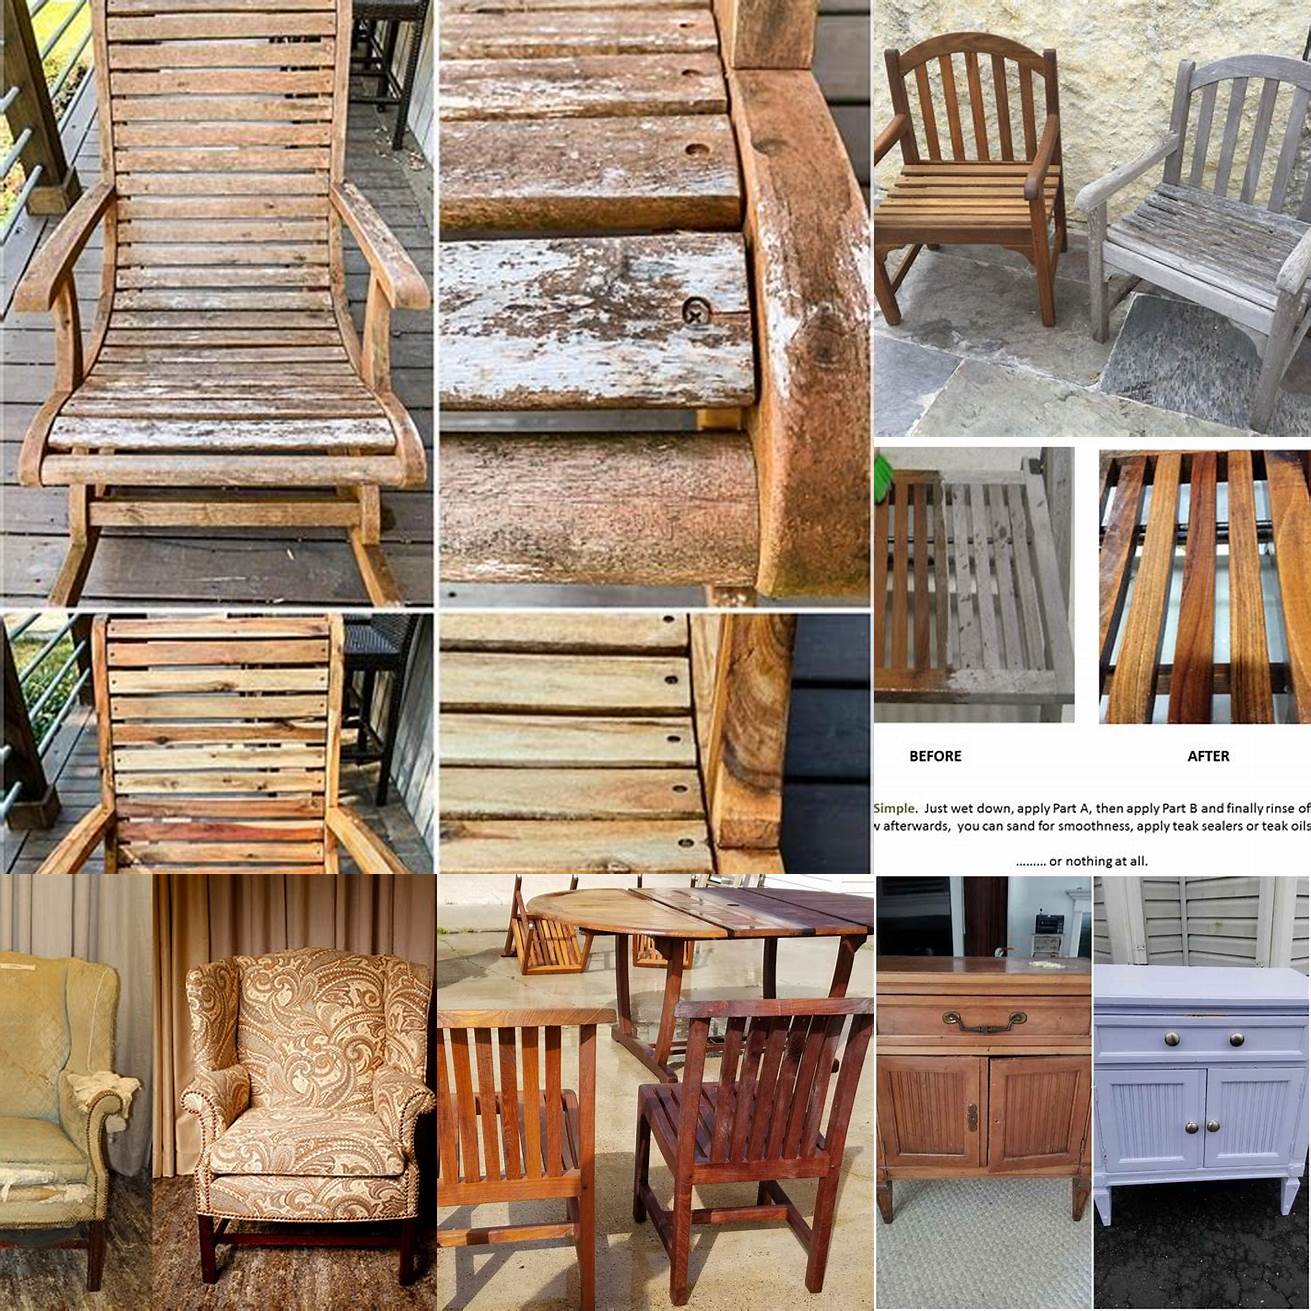 Before and after of teak furniture